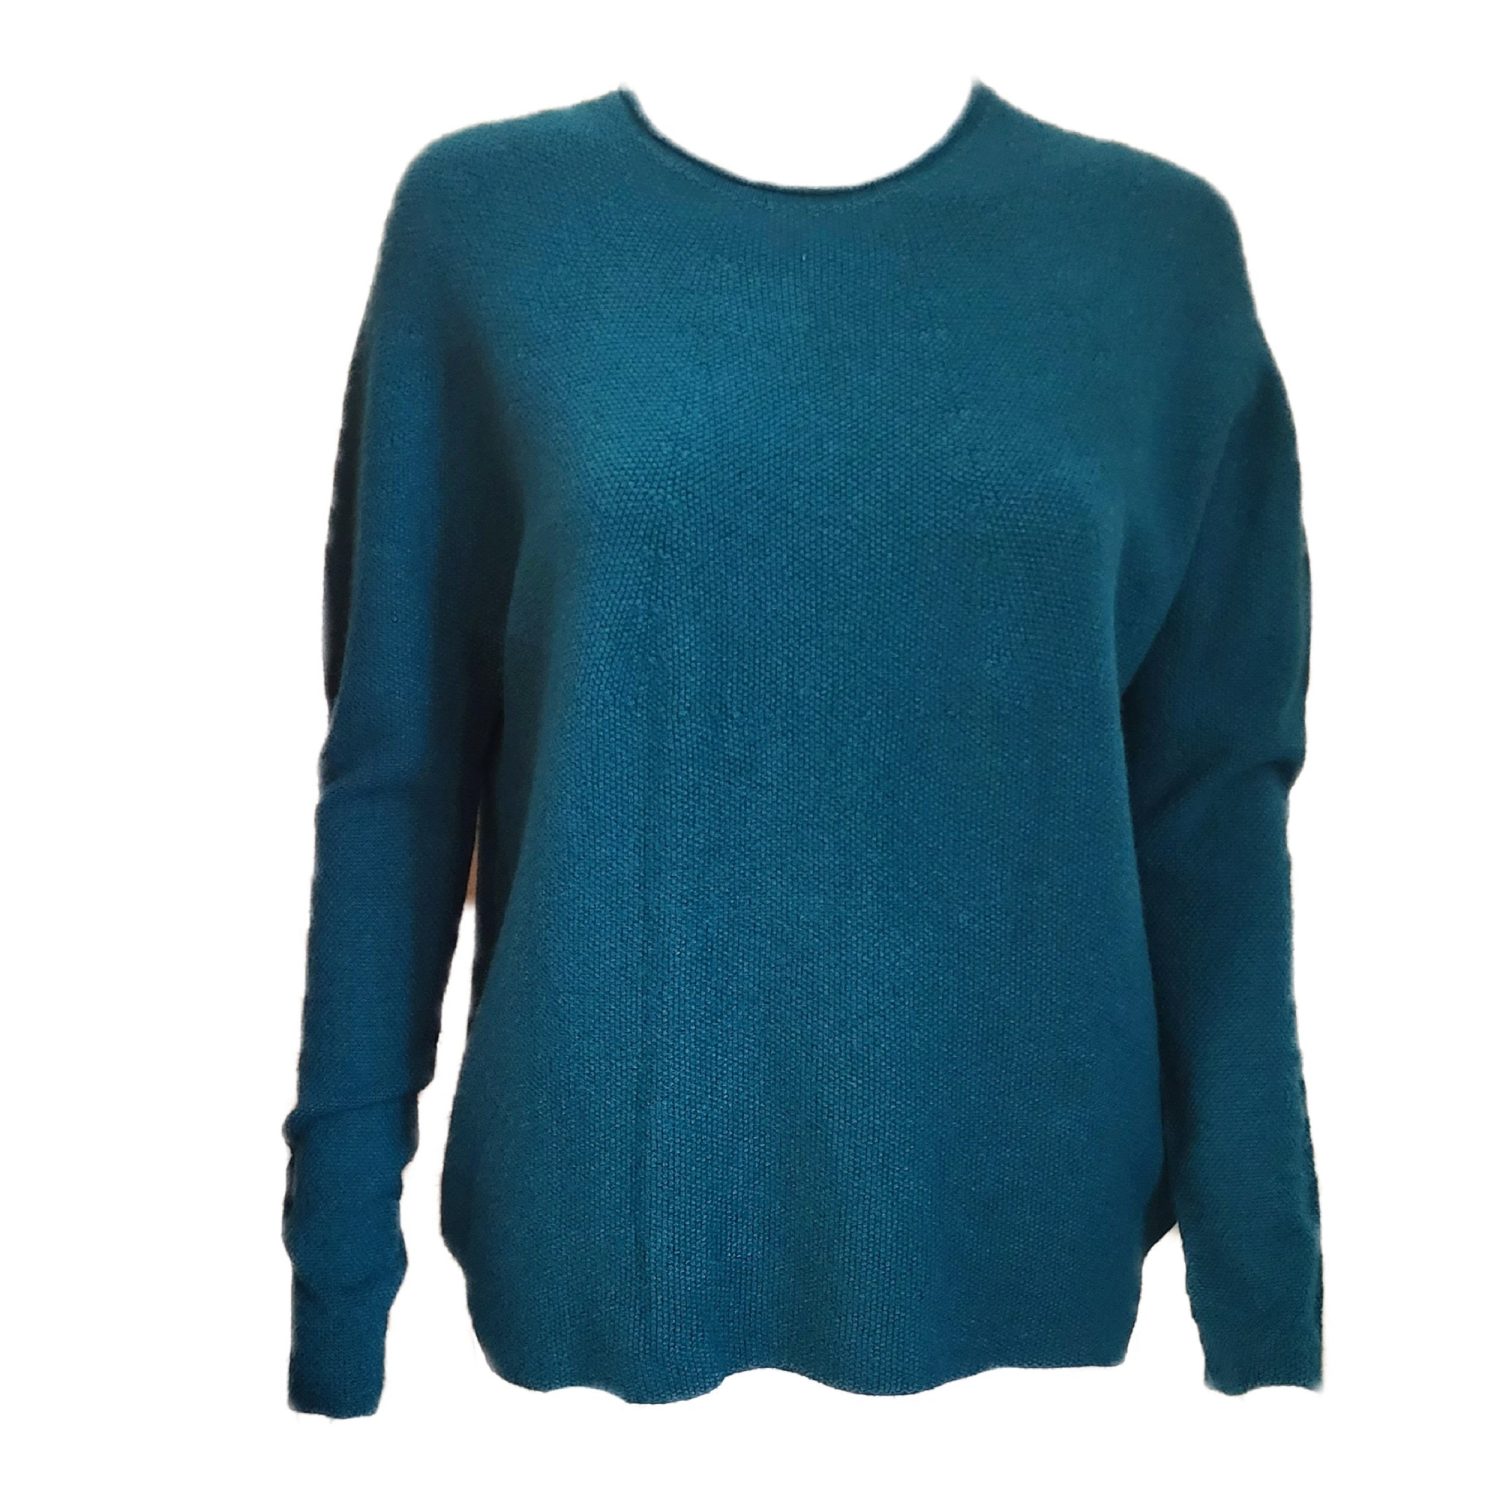 teal green jumper with round neck front view